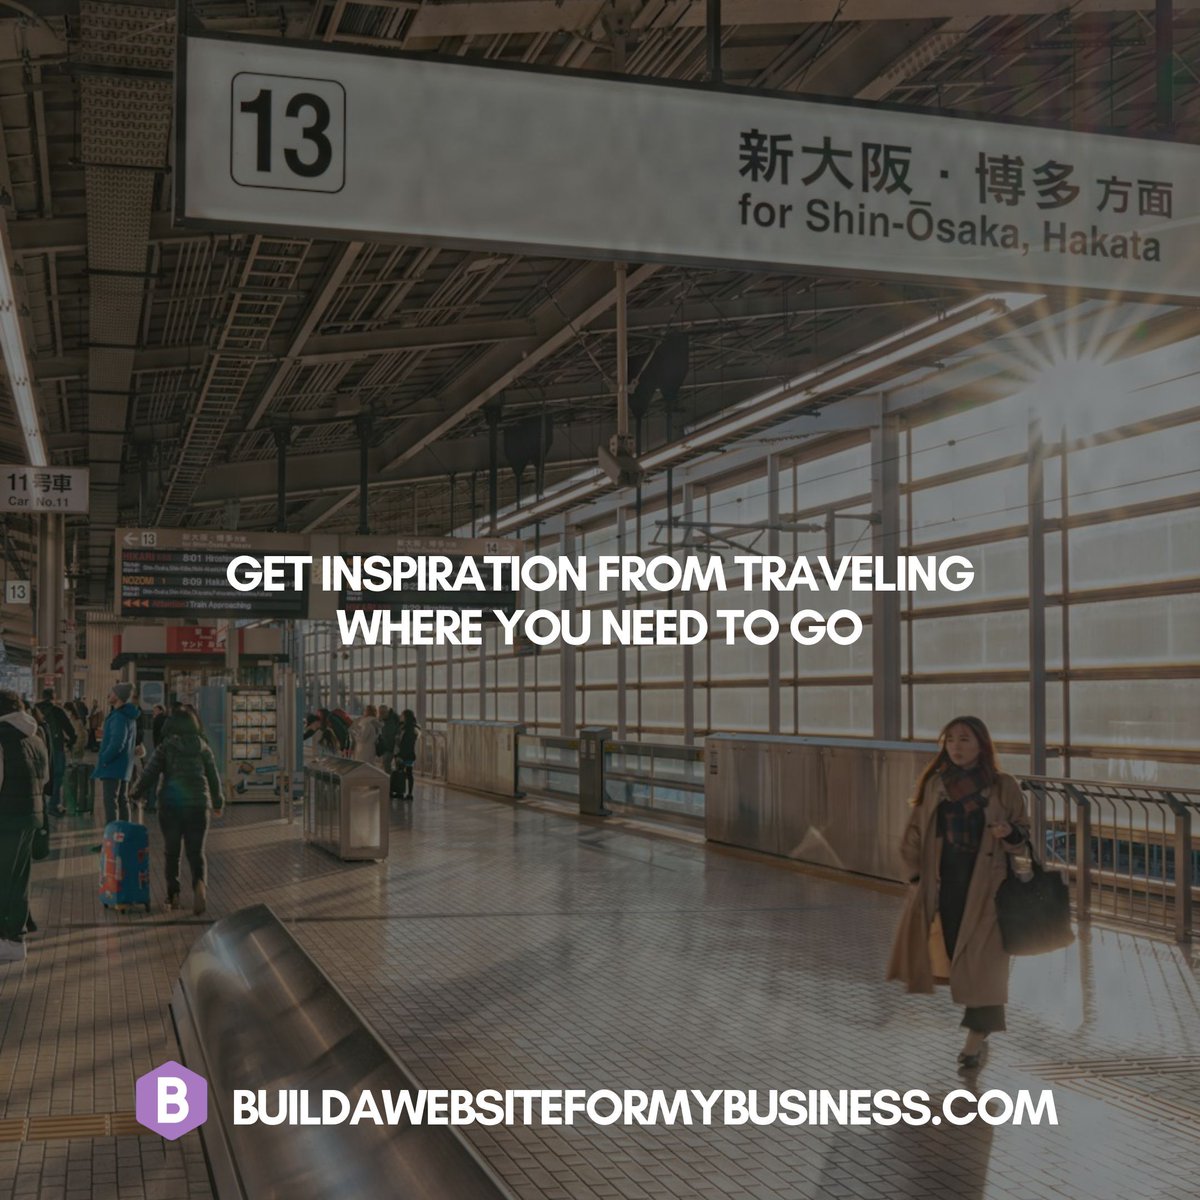 Get inspiration from traveling where you need to go - Let us build your website while we build your business buildawebsiteformybusiness.com
.
.
#InspirationDaily #QuoteOfTheDay #MotivationalQuotes #InspirationalQuotes #Positivity #PositiveMindset #SelfImprovement #DreamBig